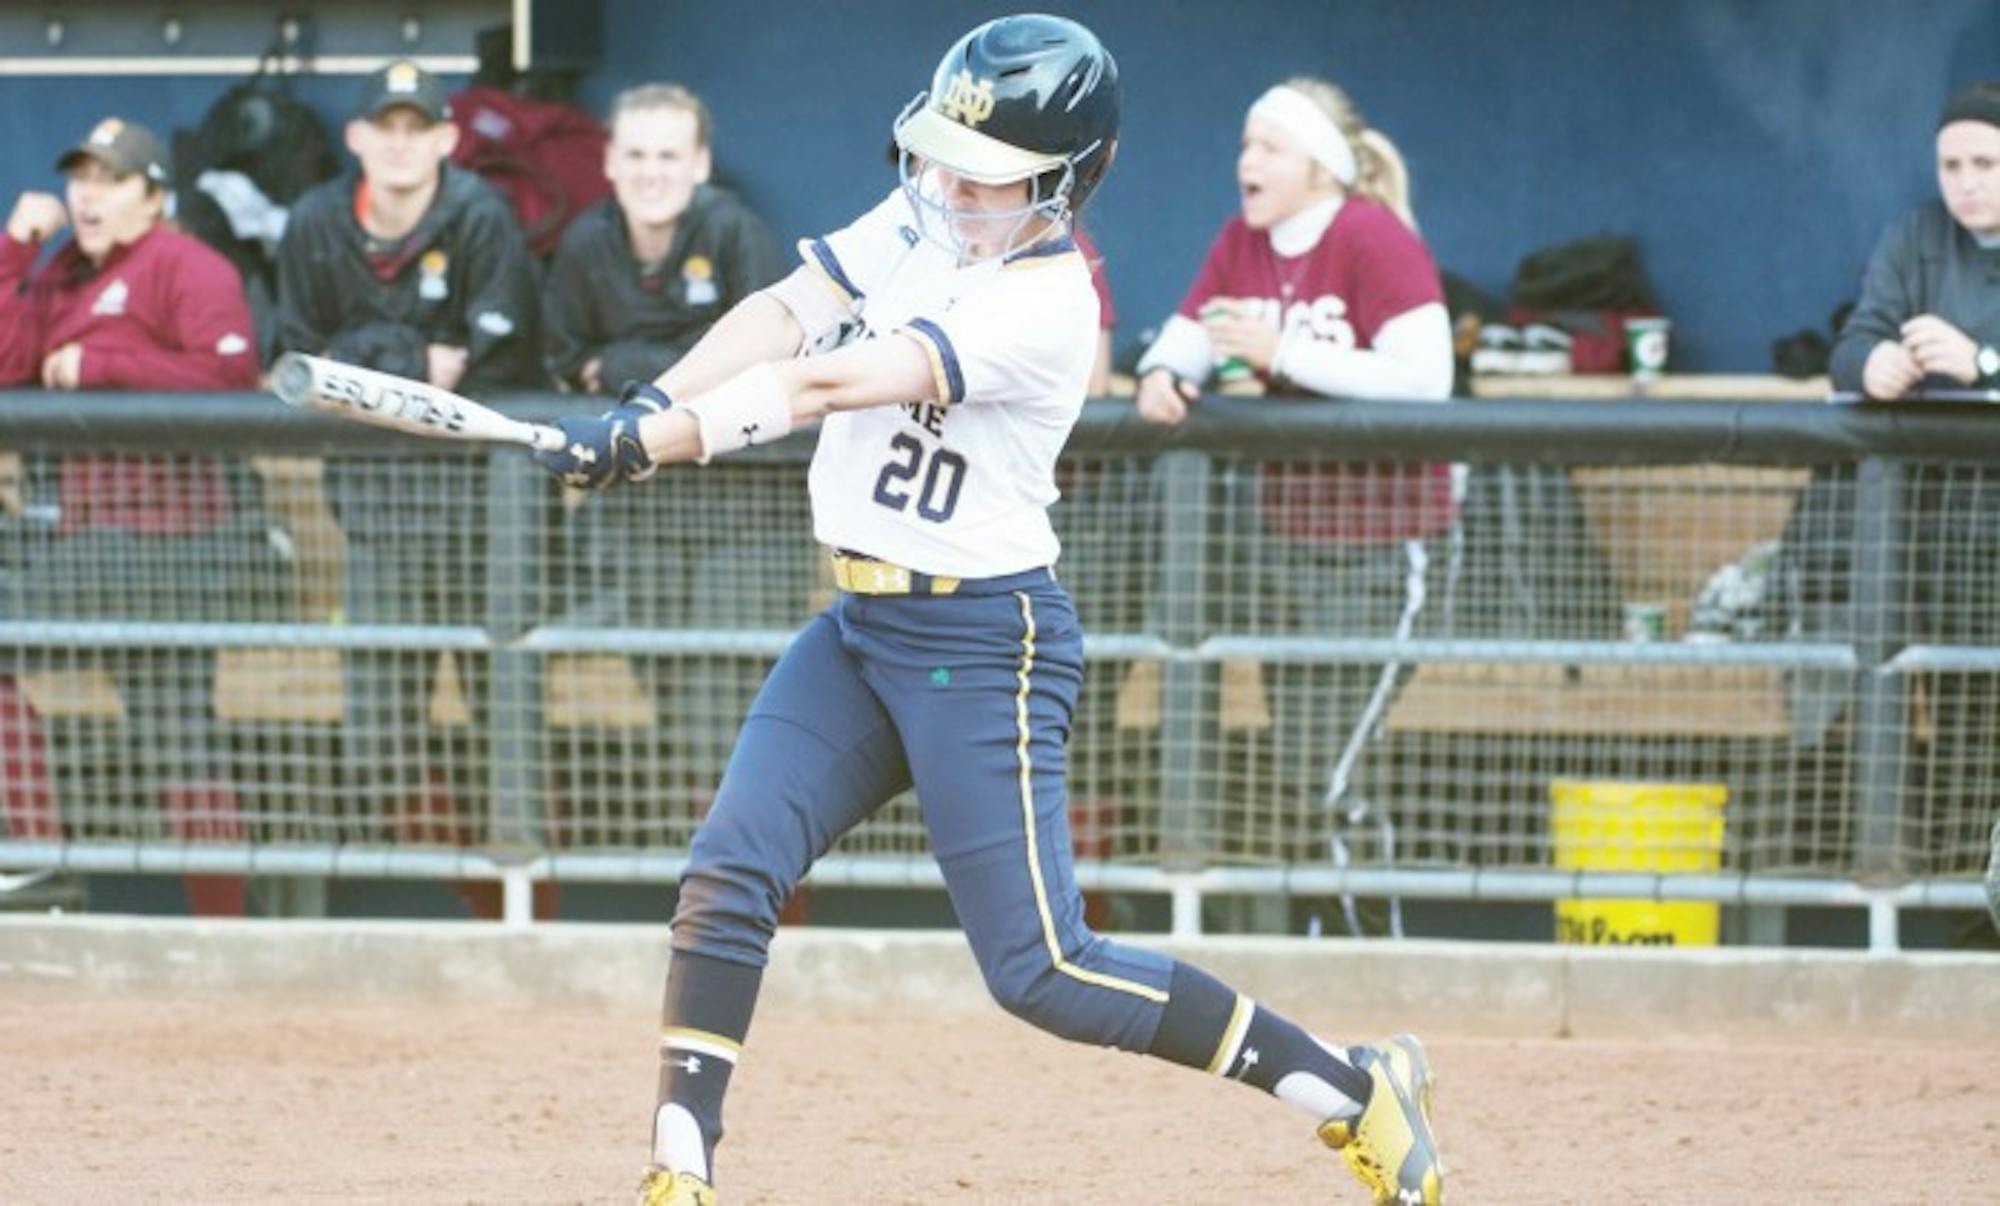 Irish junior shortstop Morgan Reed swings at a pitch during Notre Dame's 13-4 win over IUPUI on April 12 at Melissa Cook Stadium.